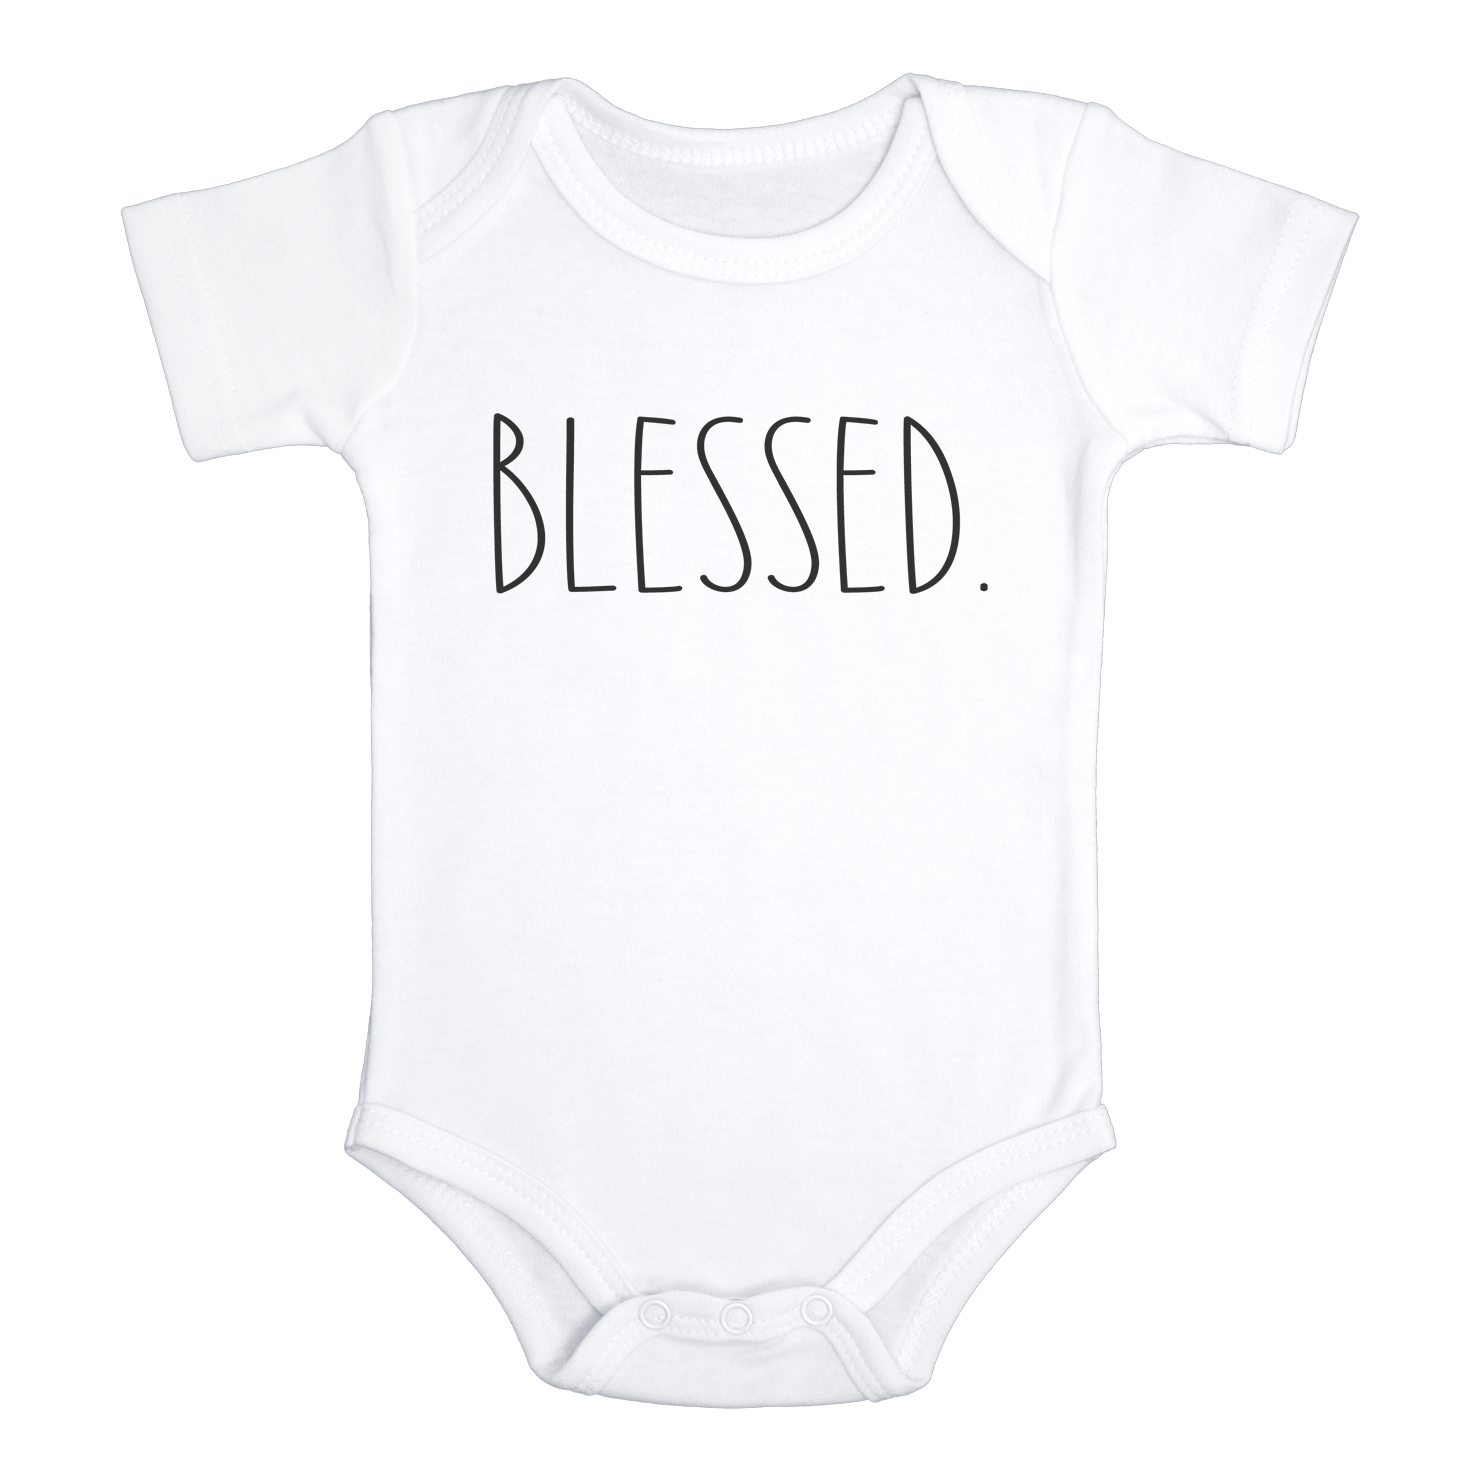 BLESSED thoughtful baby onesies - HappyAddition